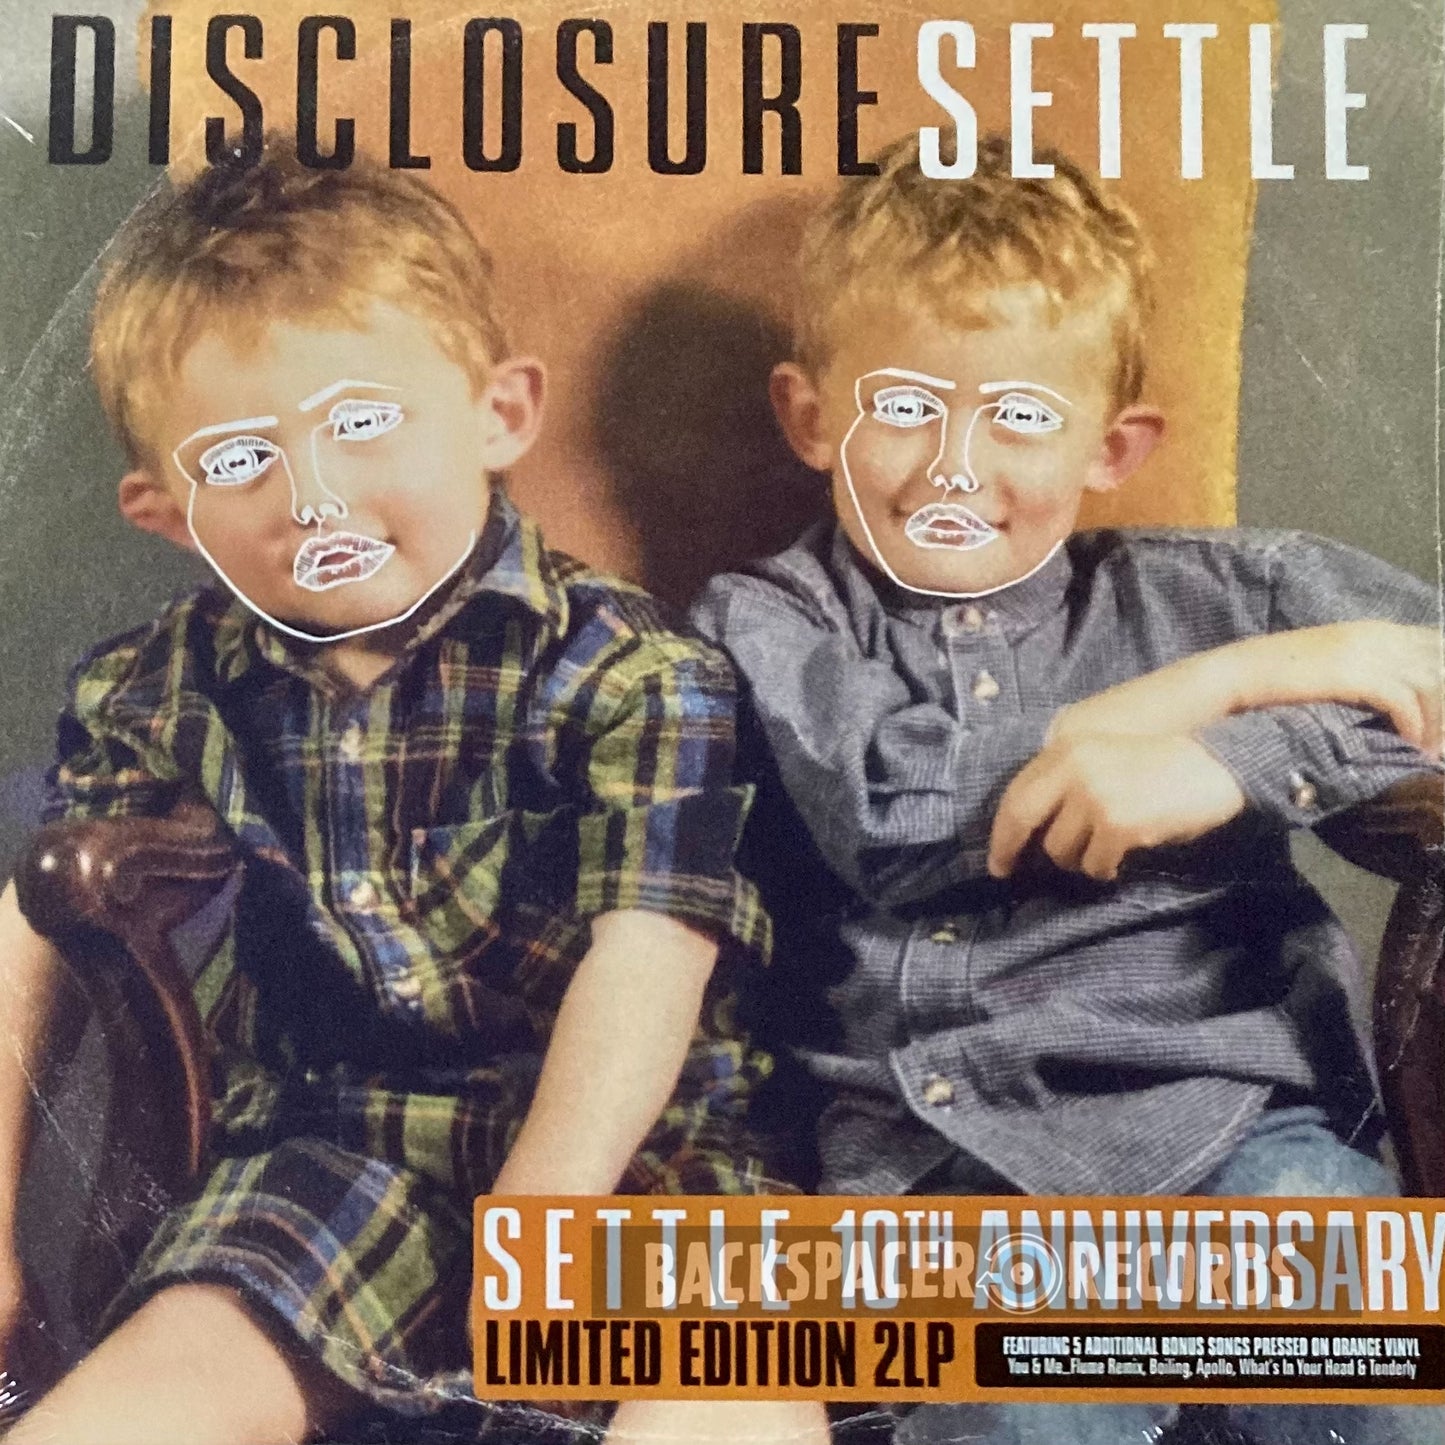 Disclosure – Settle (Limited Edition) 2-LP (Sealed)